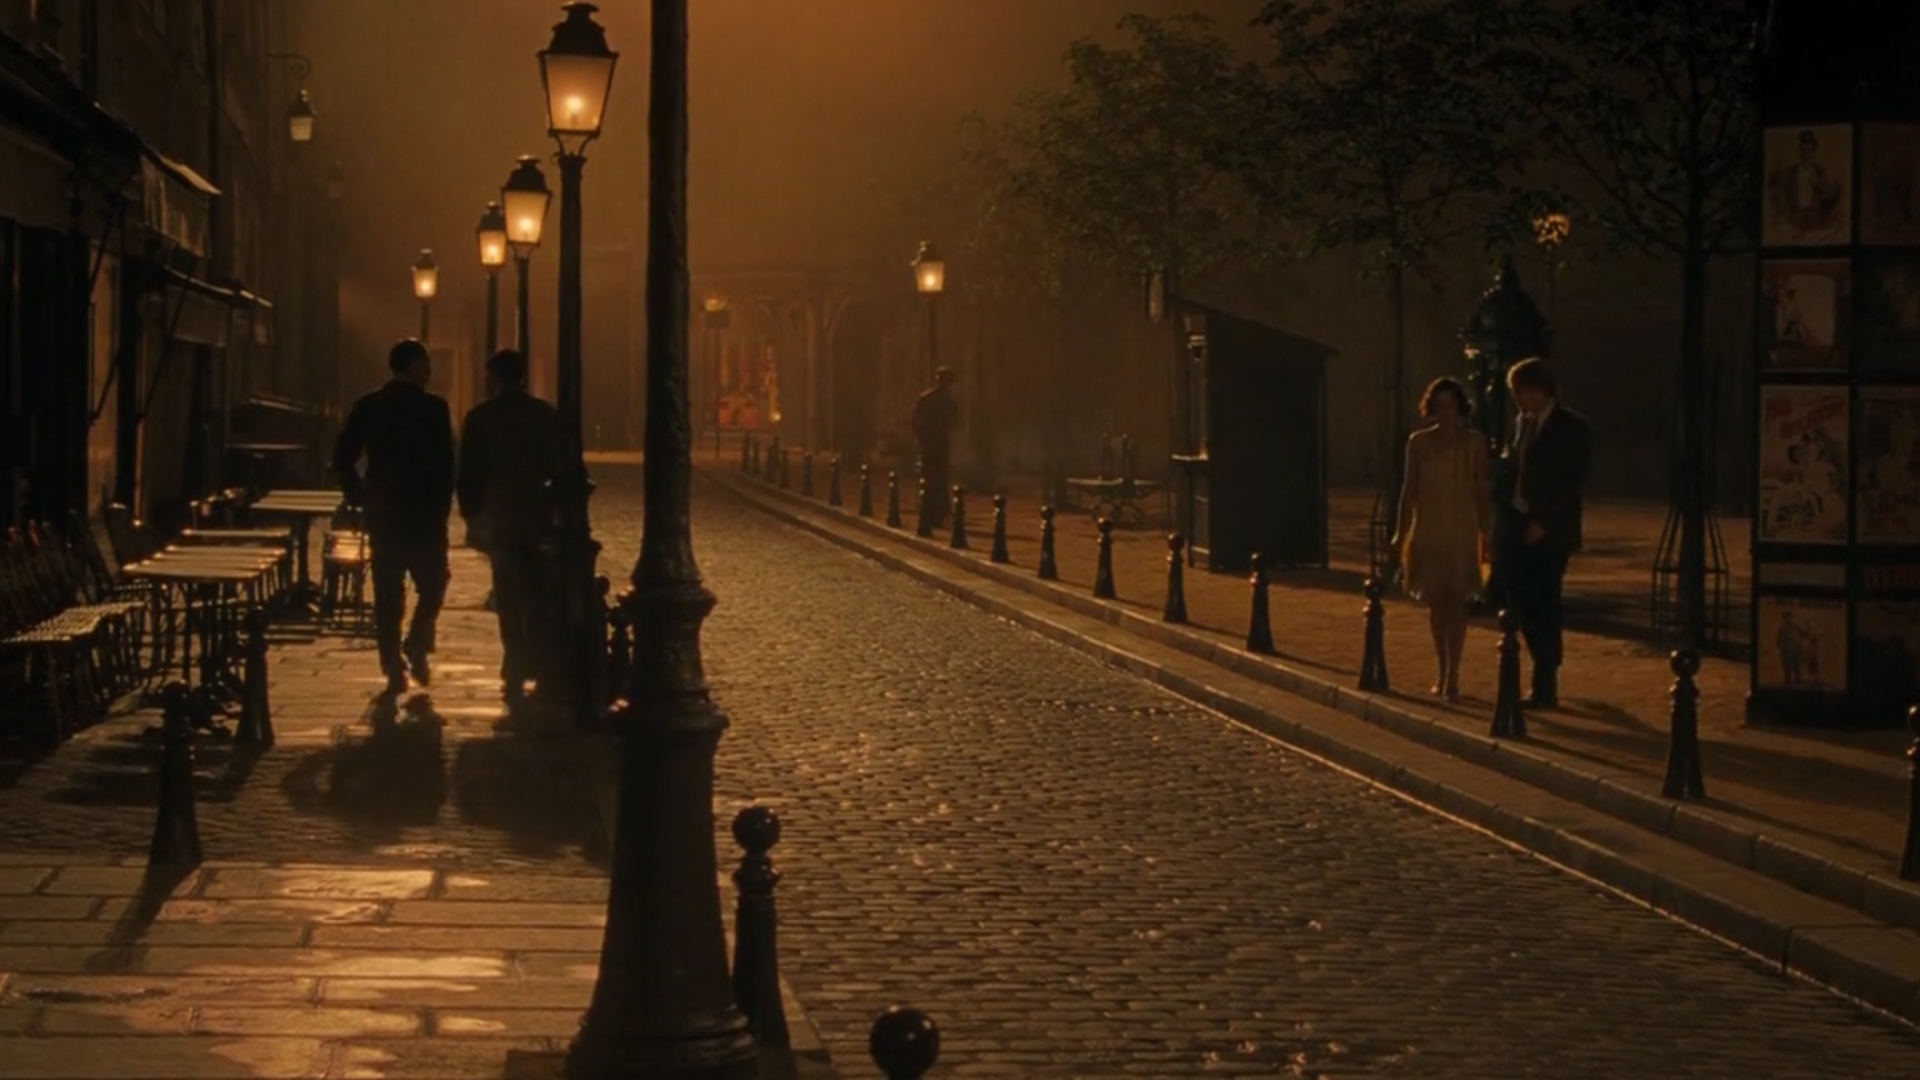 Midnight in Paris: The film won the Academy Award for Best Original Screenplay in 2012. 1920x1080 Full HD Wallpaper.